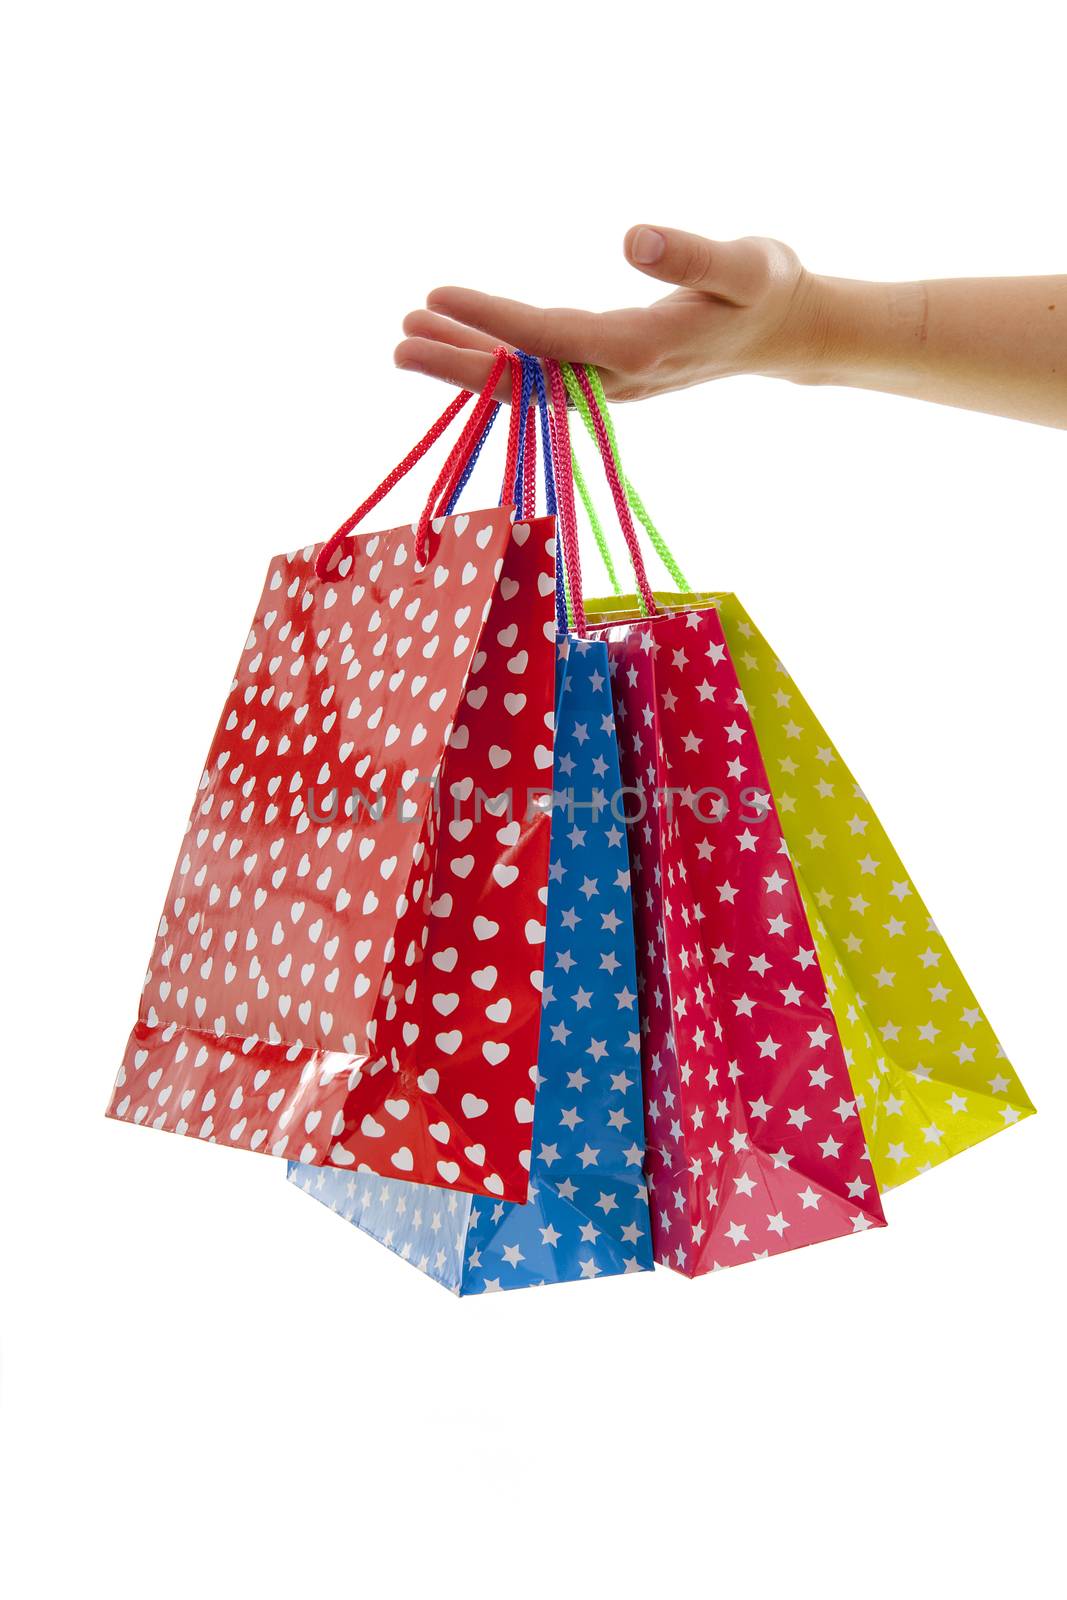 Hand is holding colorful shopping bags by sannie32